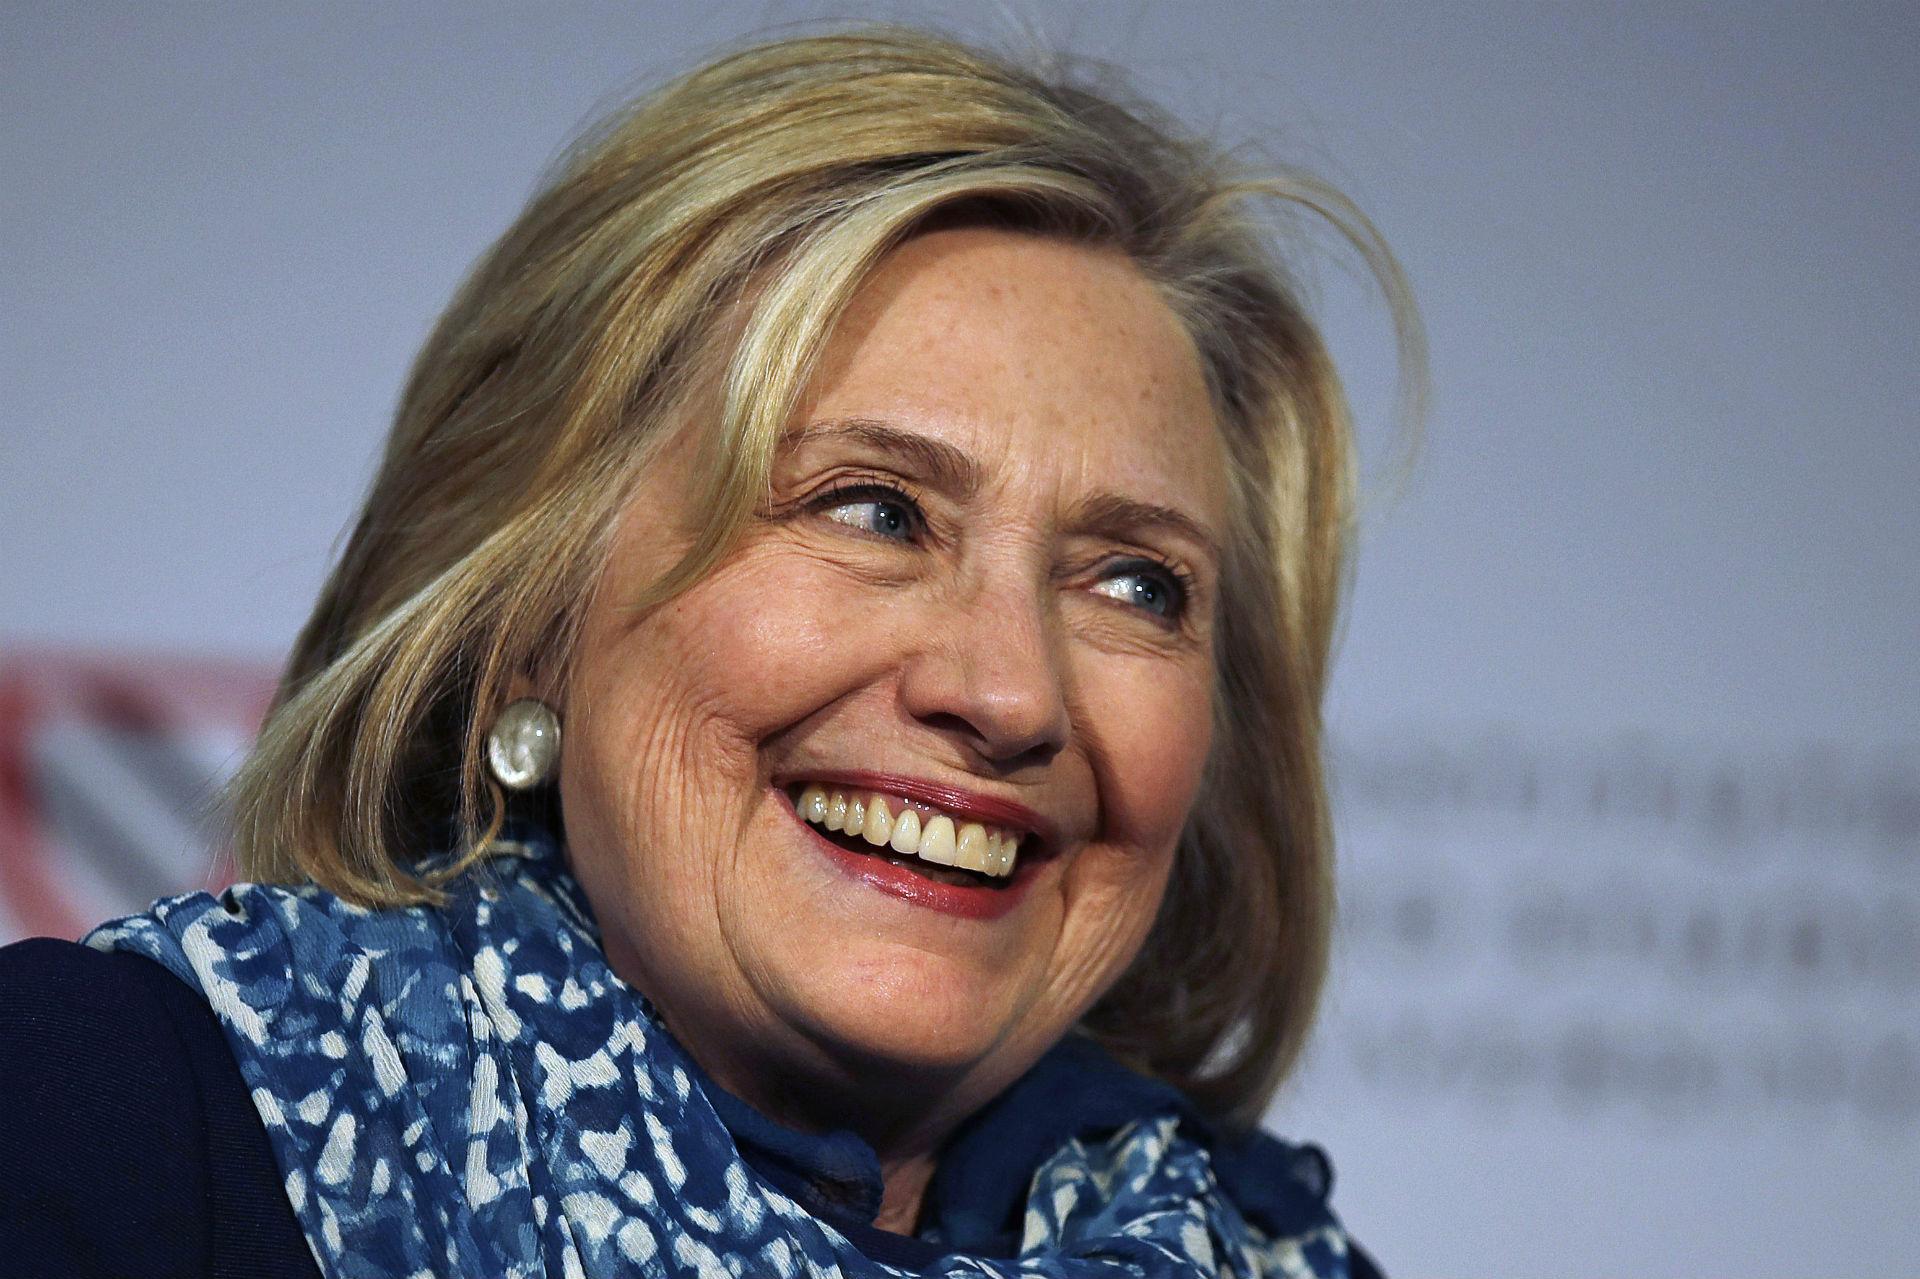 In this May 25, 2018 file photo, Hillary Clinton smiles as she is introduced at Harvard University in Cambridge, Massachusetts. (AP Photo / Charles Krupa)